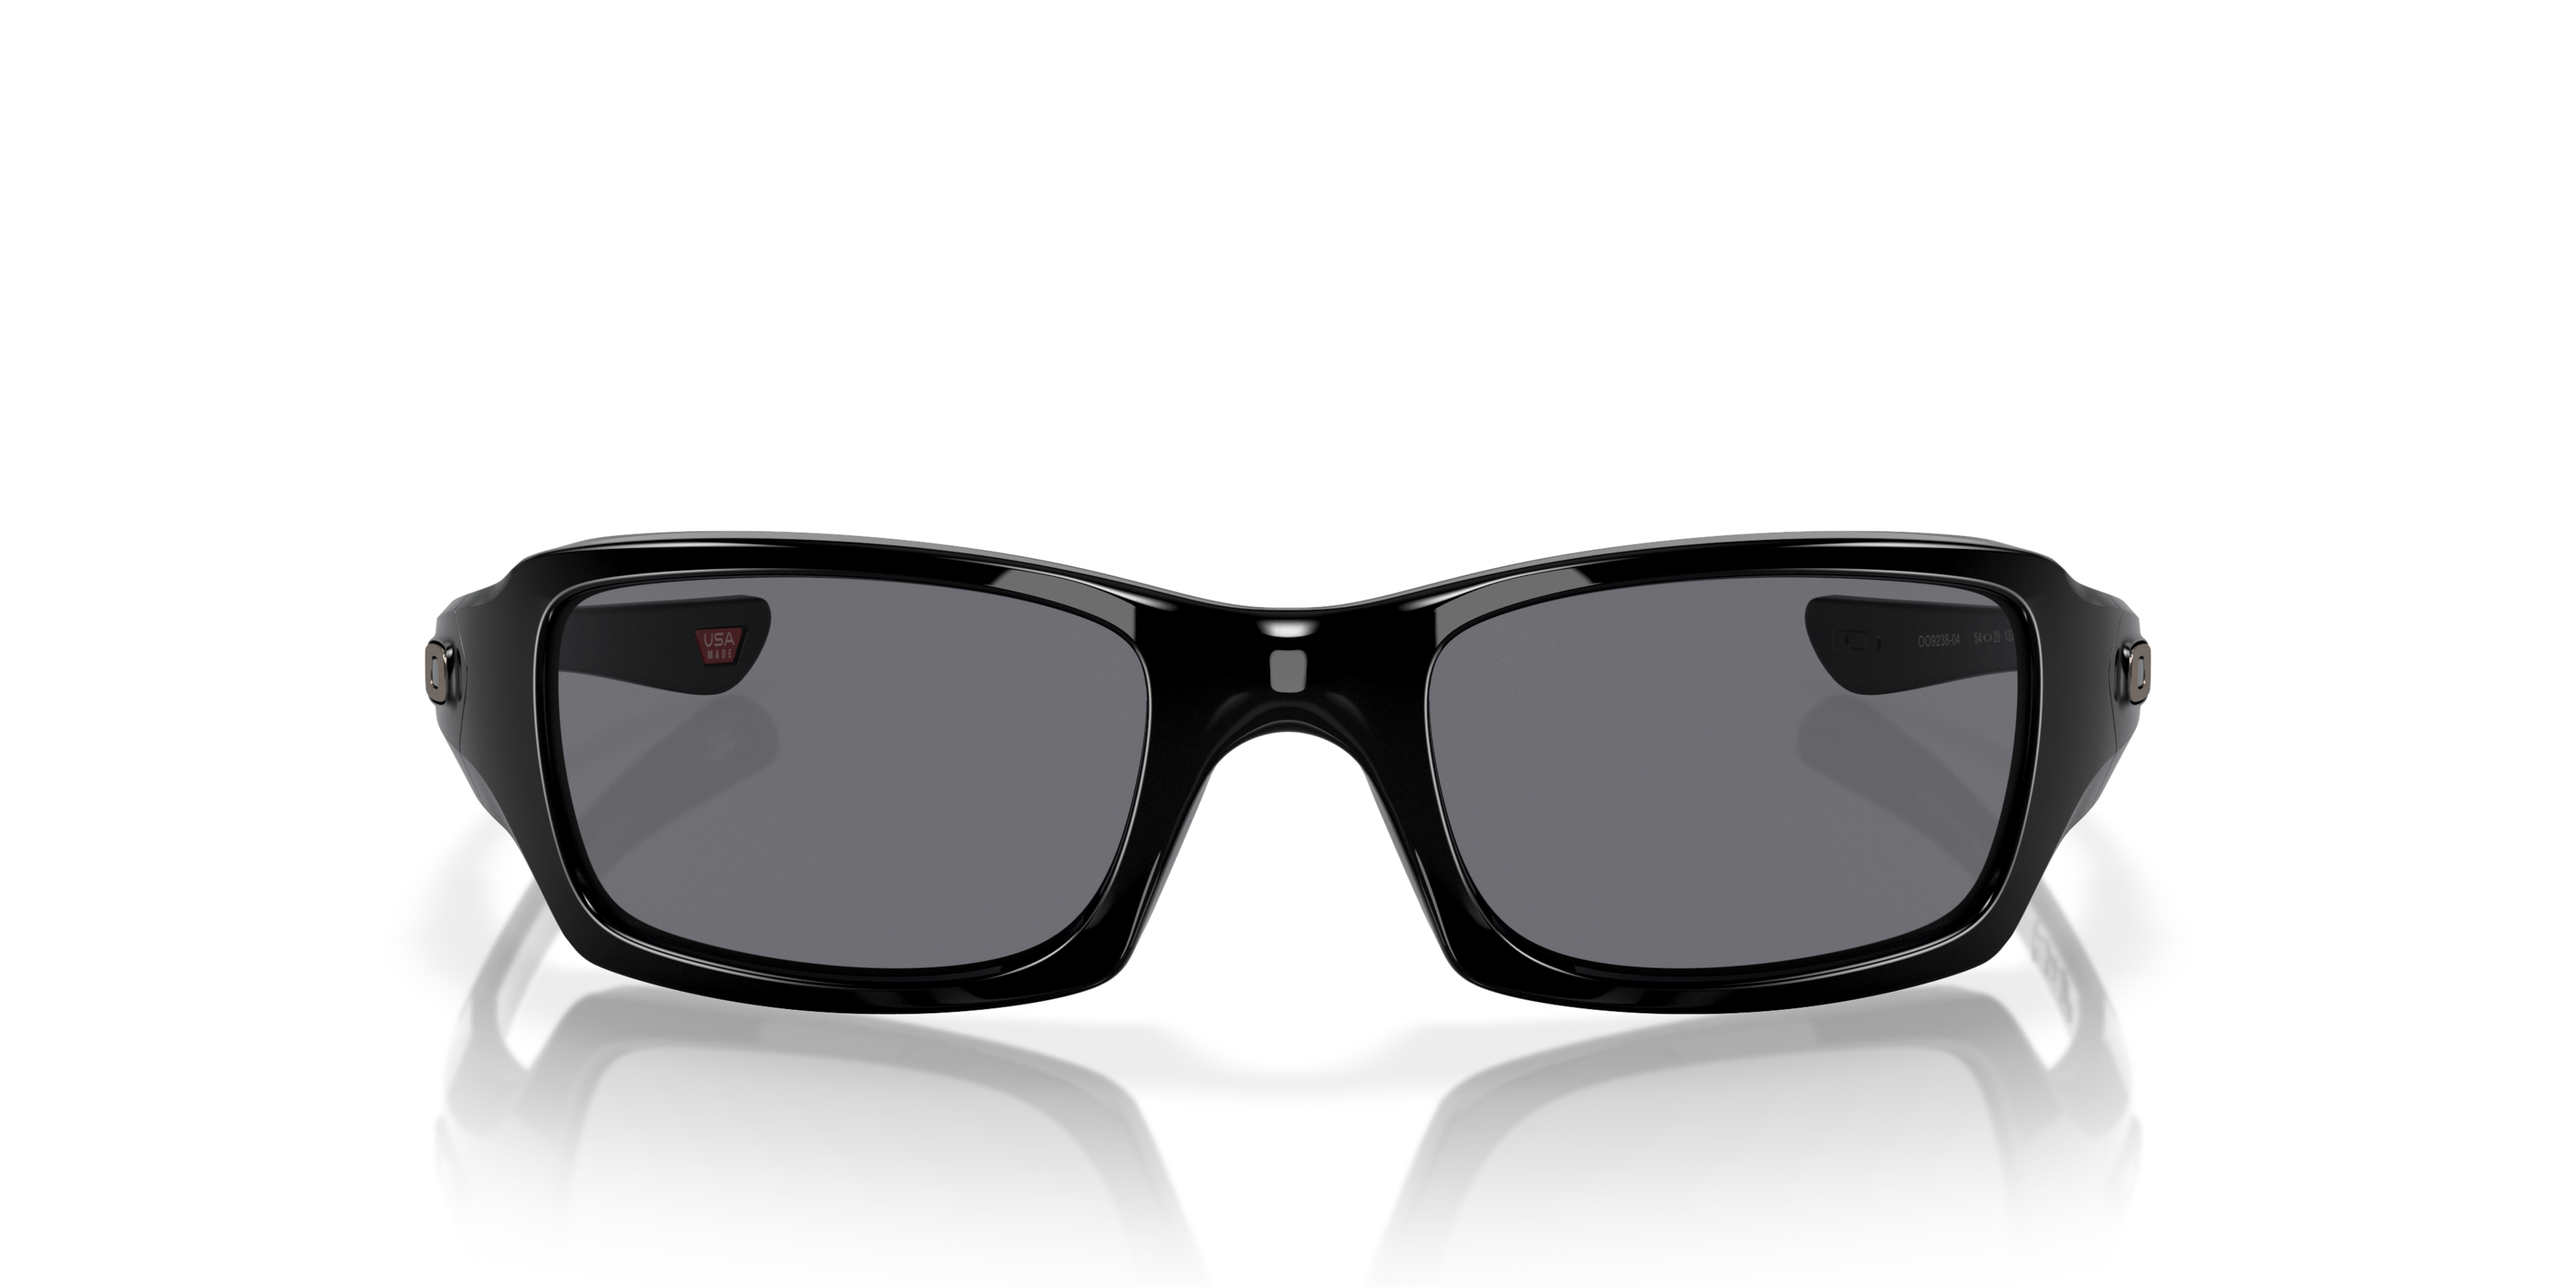 [products.image.front] OAKLEY FIVES SQUARED OO9238 923804